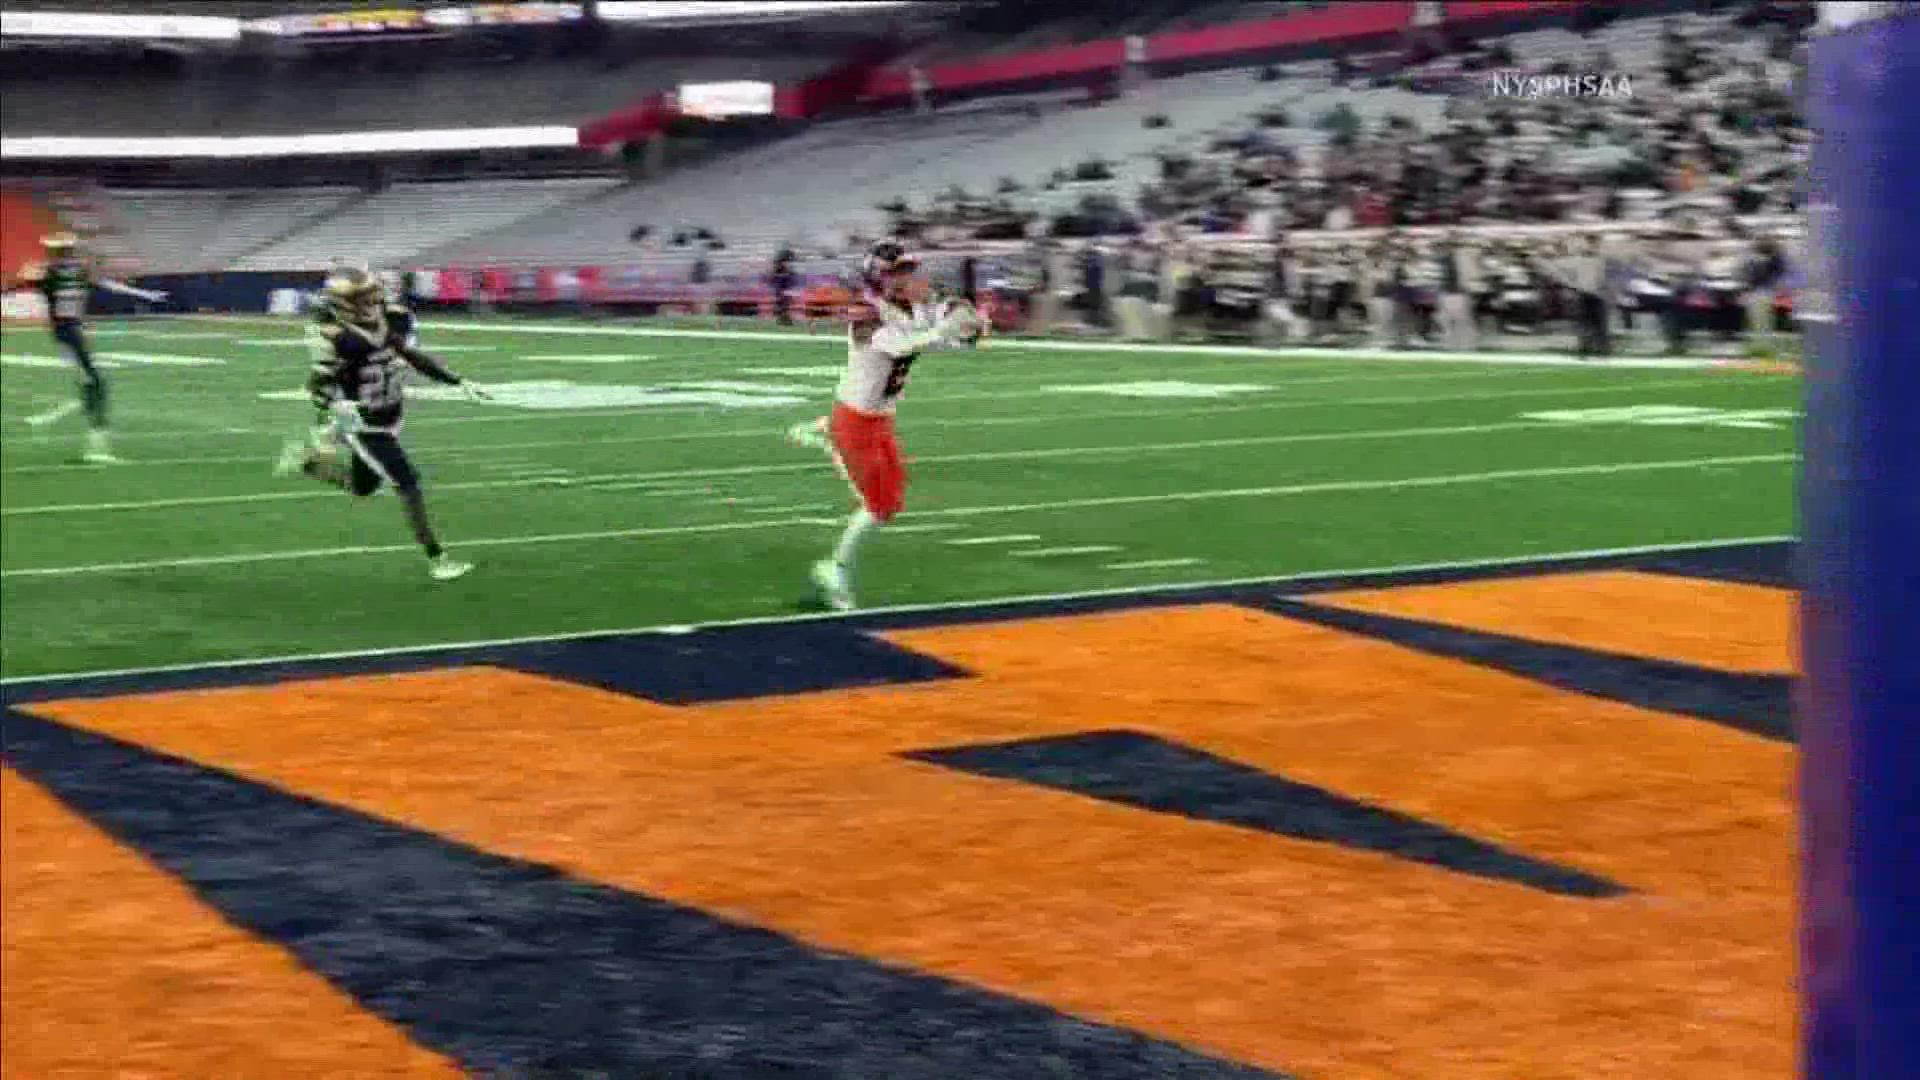 The Bennett Tigers brought home the New York State Championship title. The Tigers beat the Newburgh Goldback 42-8 in the championship game, held at the Carrier Dome.